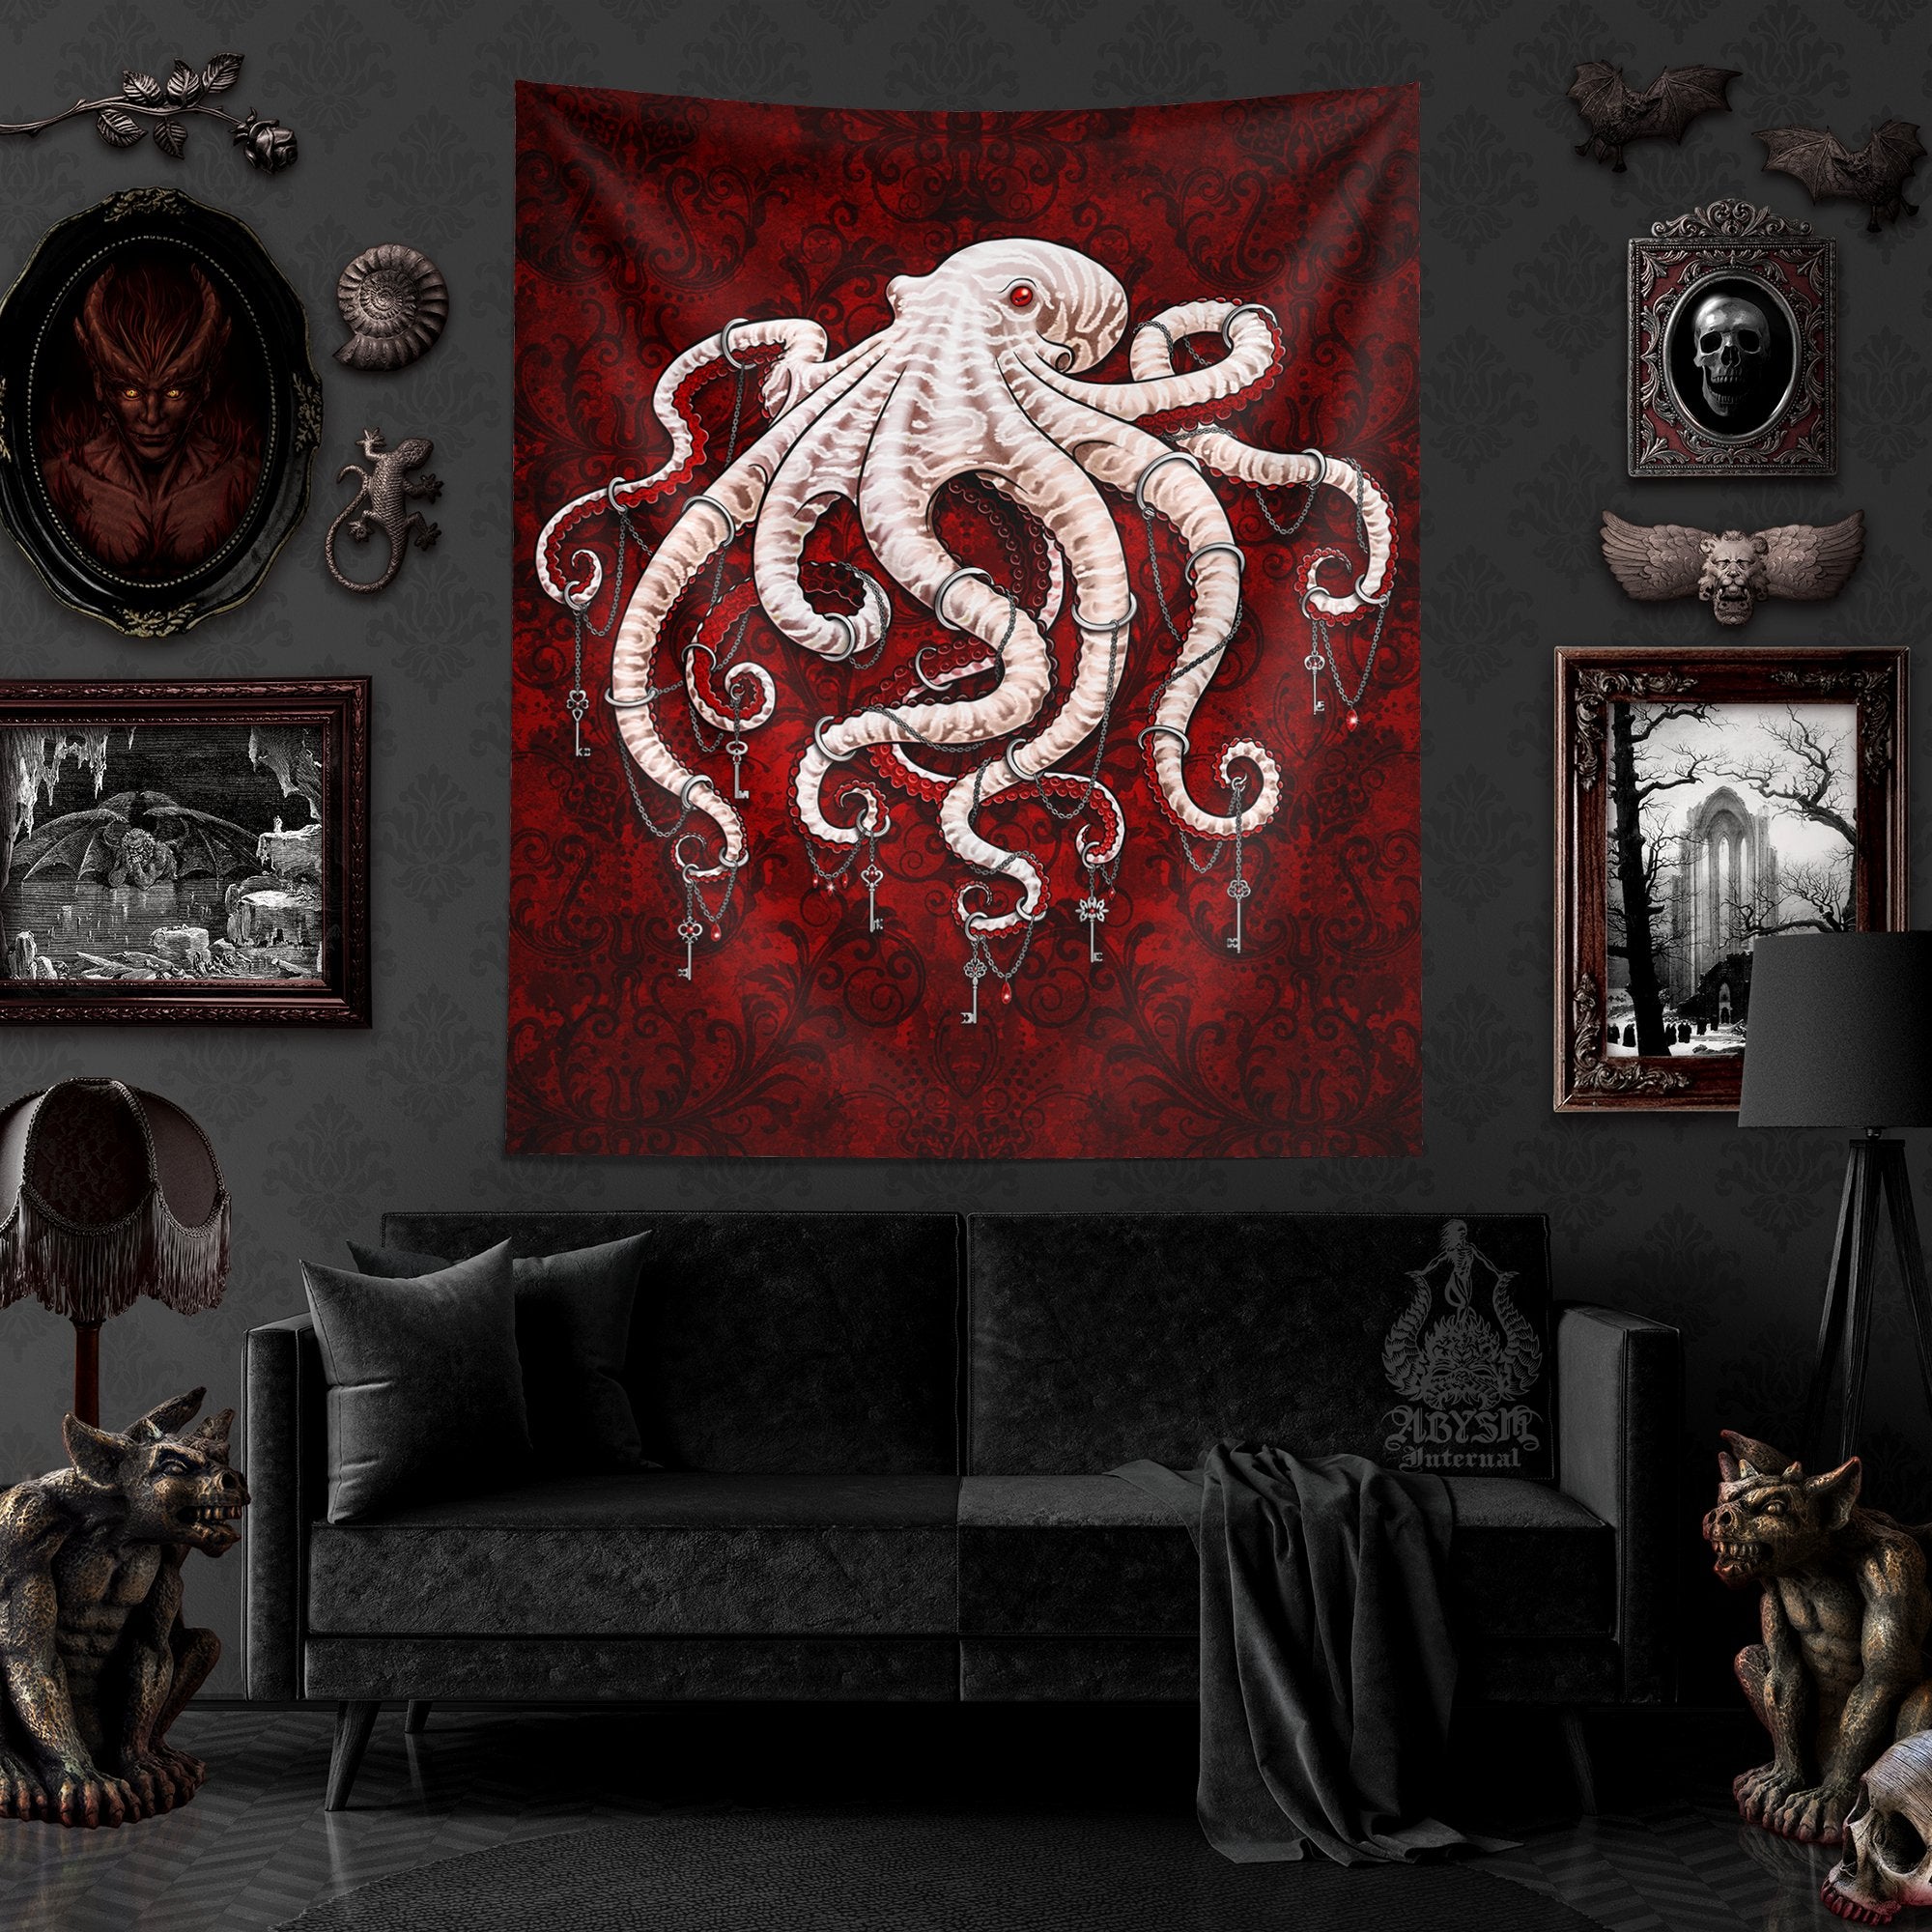 Goth Tapestry, Octopus Wall Hanging, Gothic Home Decor, Vertical Art Print - Bloody Red White - Abysm Internal